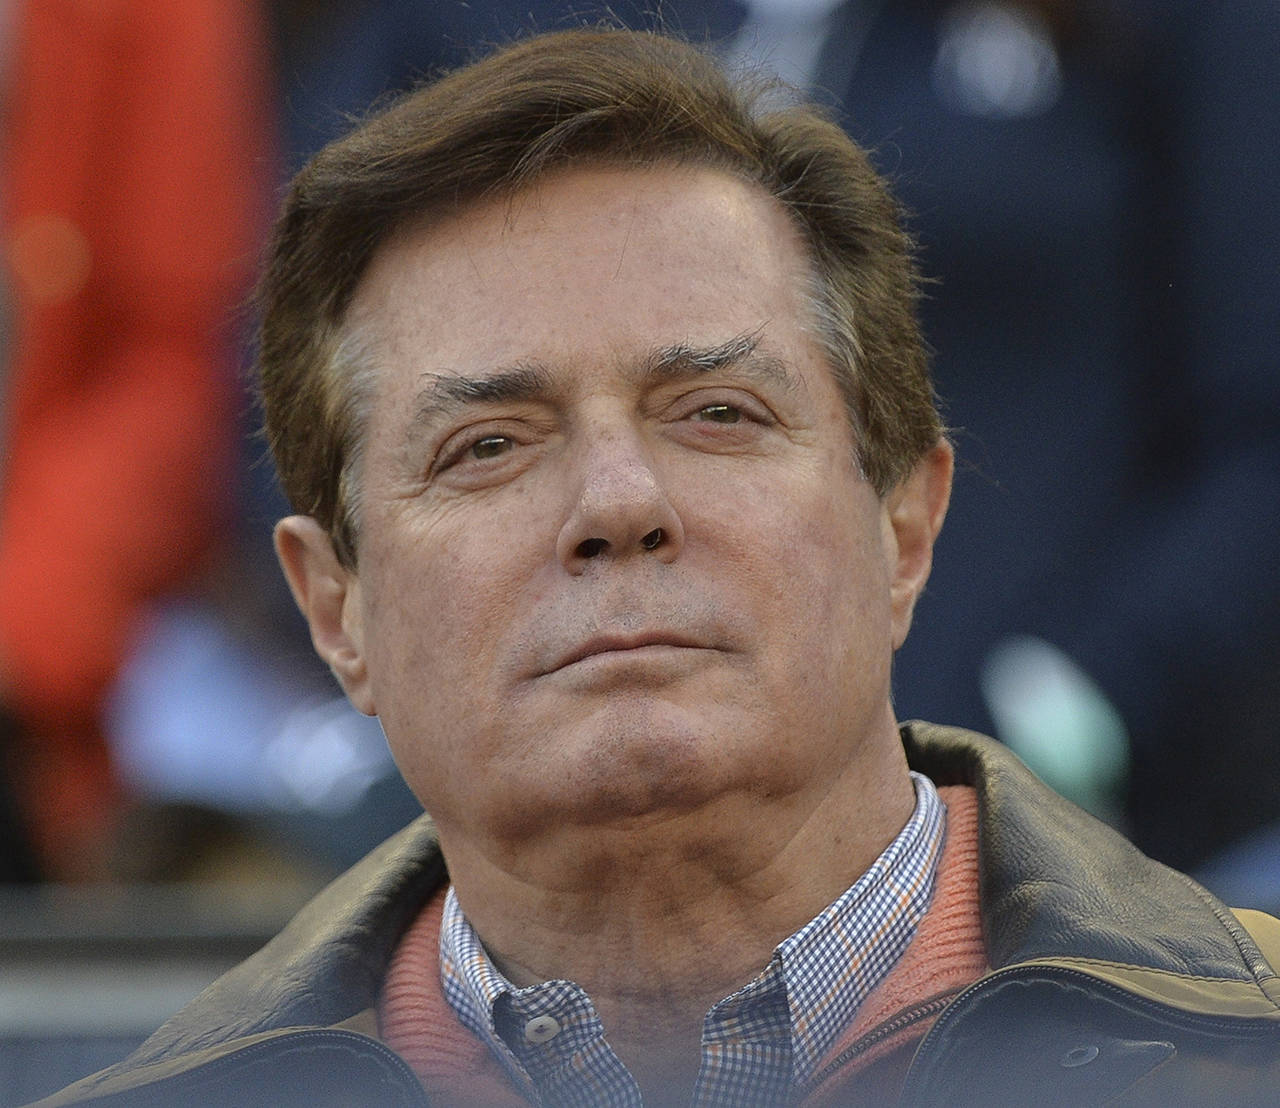 Howard Simmons | New York Daily News                                 Paul Manafort has surrendered to federal authorities, according to multiple reports.